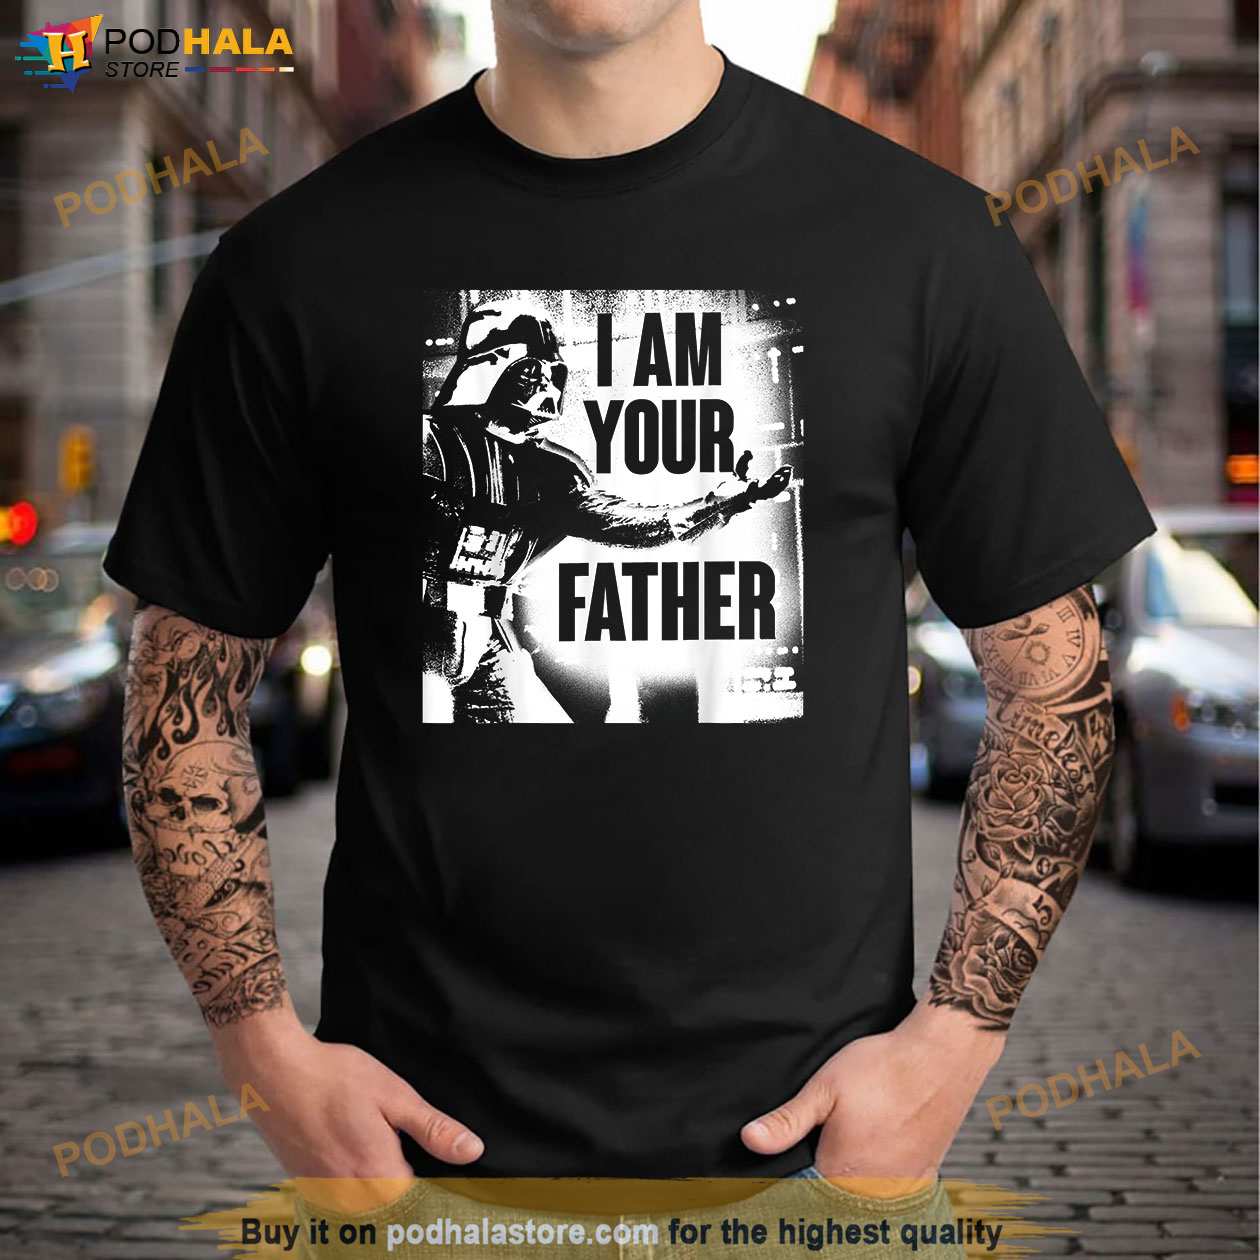 Wars Darth Vader Your Father Dad Spray Paint Shirt, New Dad Gift Ideas - Bring Your Thoughts And Imaginations Into Reality Today